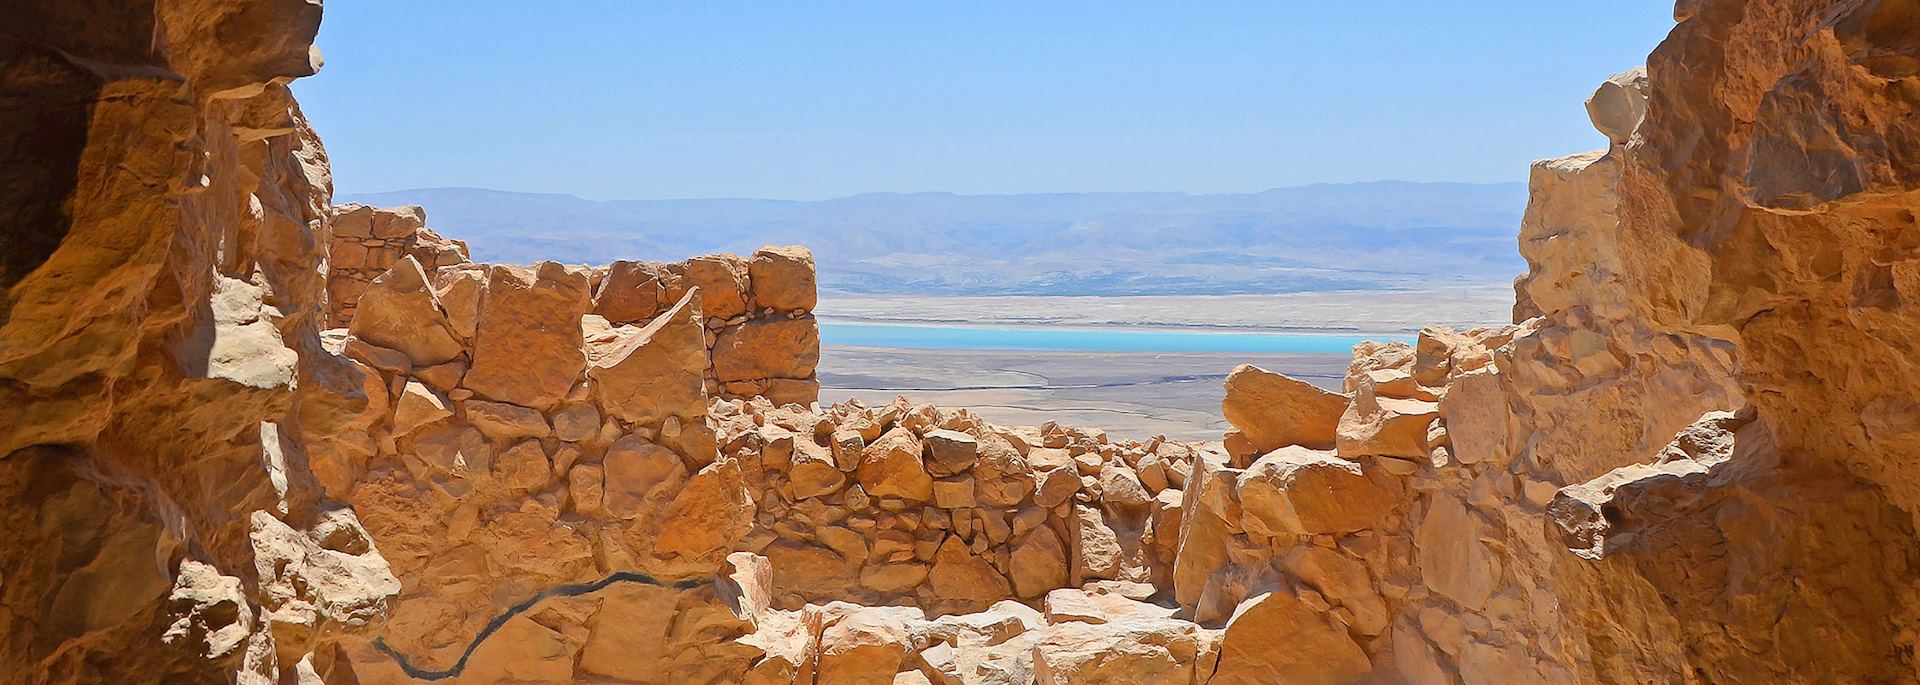 View from Fortress Masada